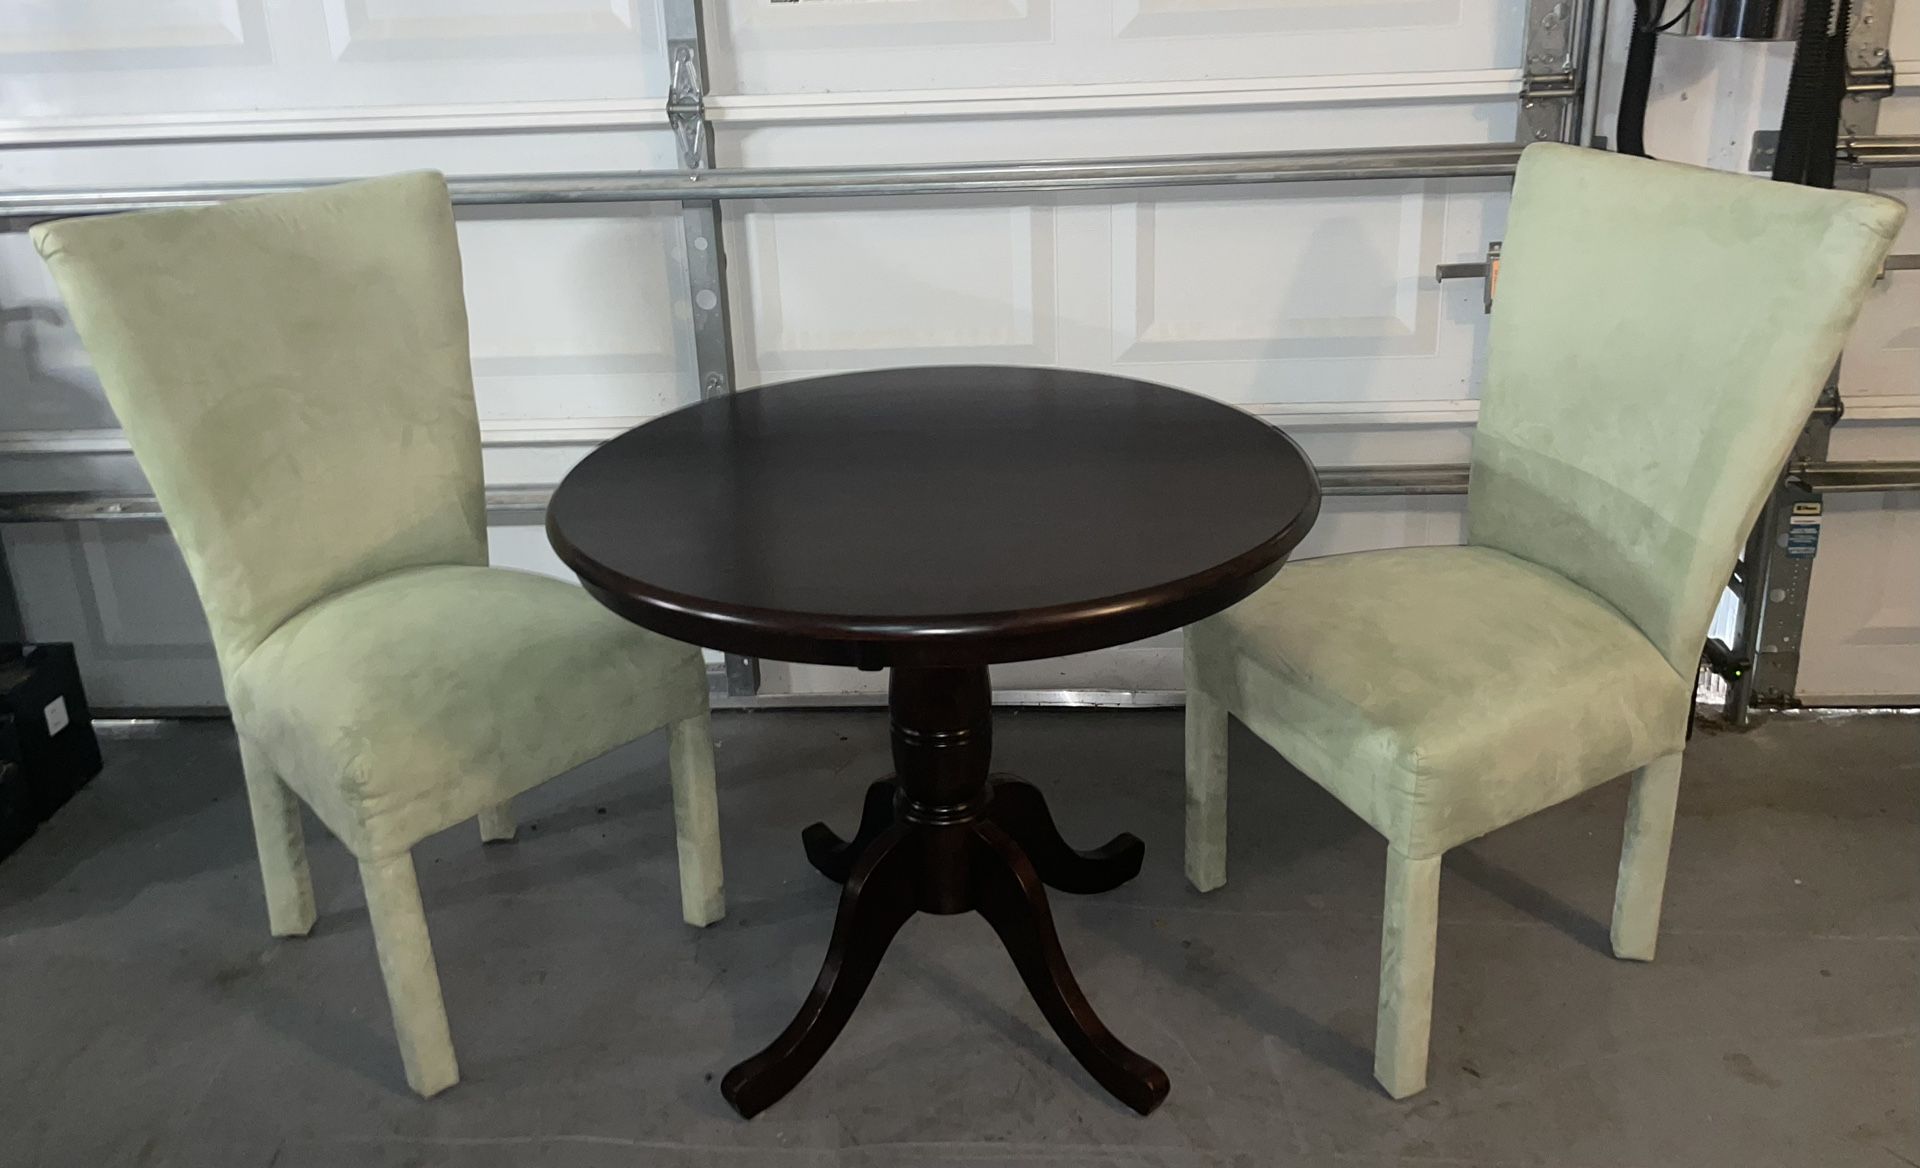 Dining Set - 36” Solid Wood Pedestal Table + (2) Parson Chairs - Great For smaller Kitchen